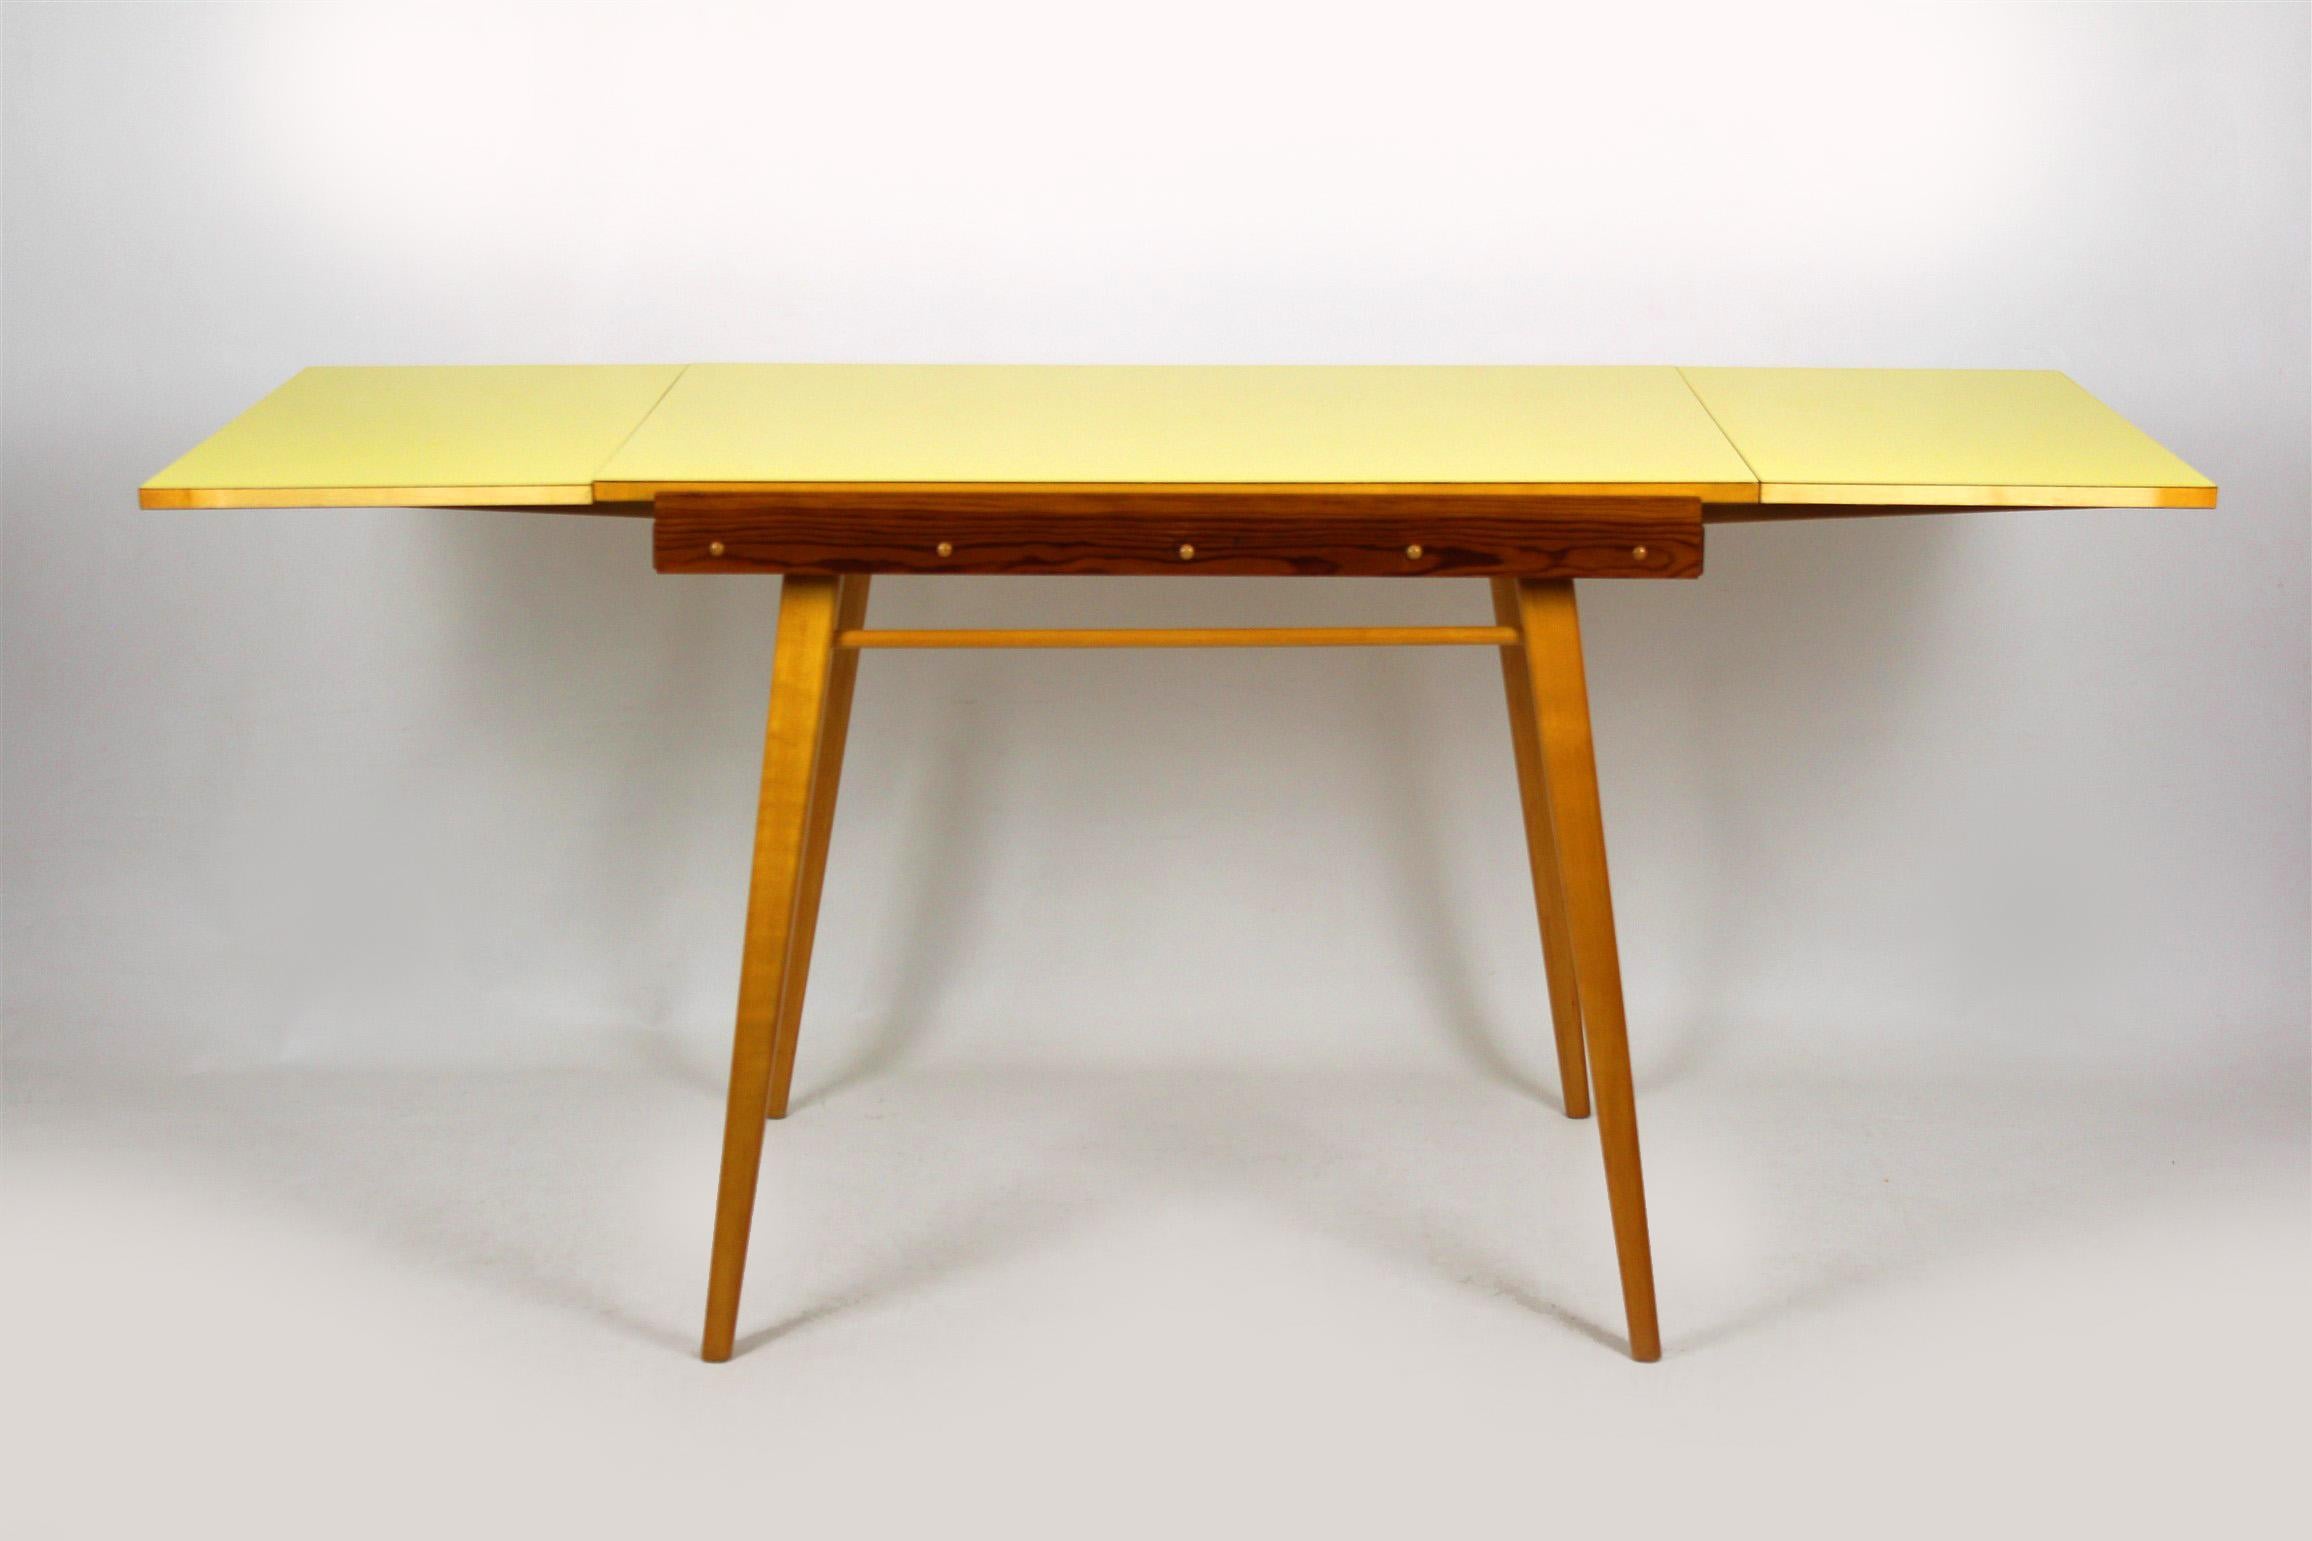 Yellow formica folding dining table, manufactured in 1960s in Czechoslovakia. The table measures 169cm wide when fully extended.